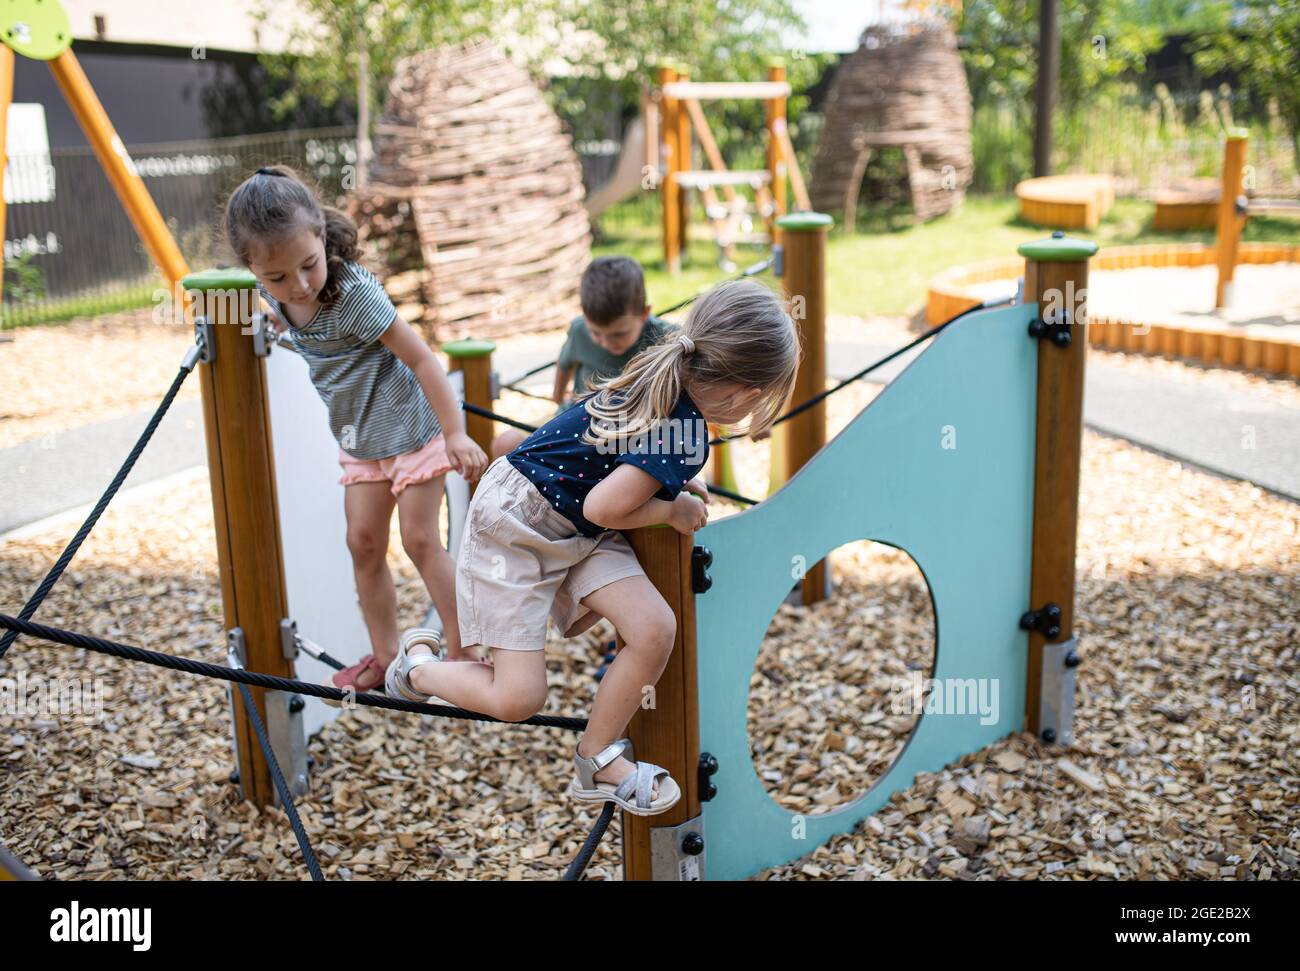 Group of small nursery school children playing outdoors on playground. Stock Photo